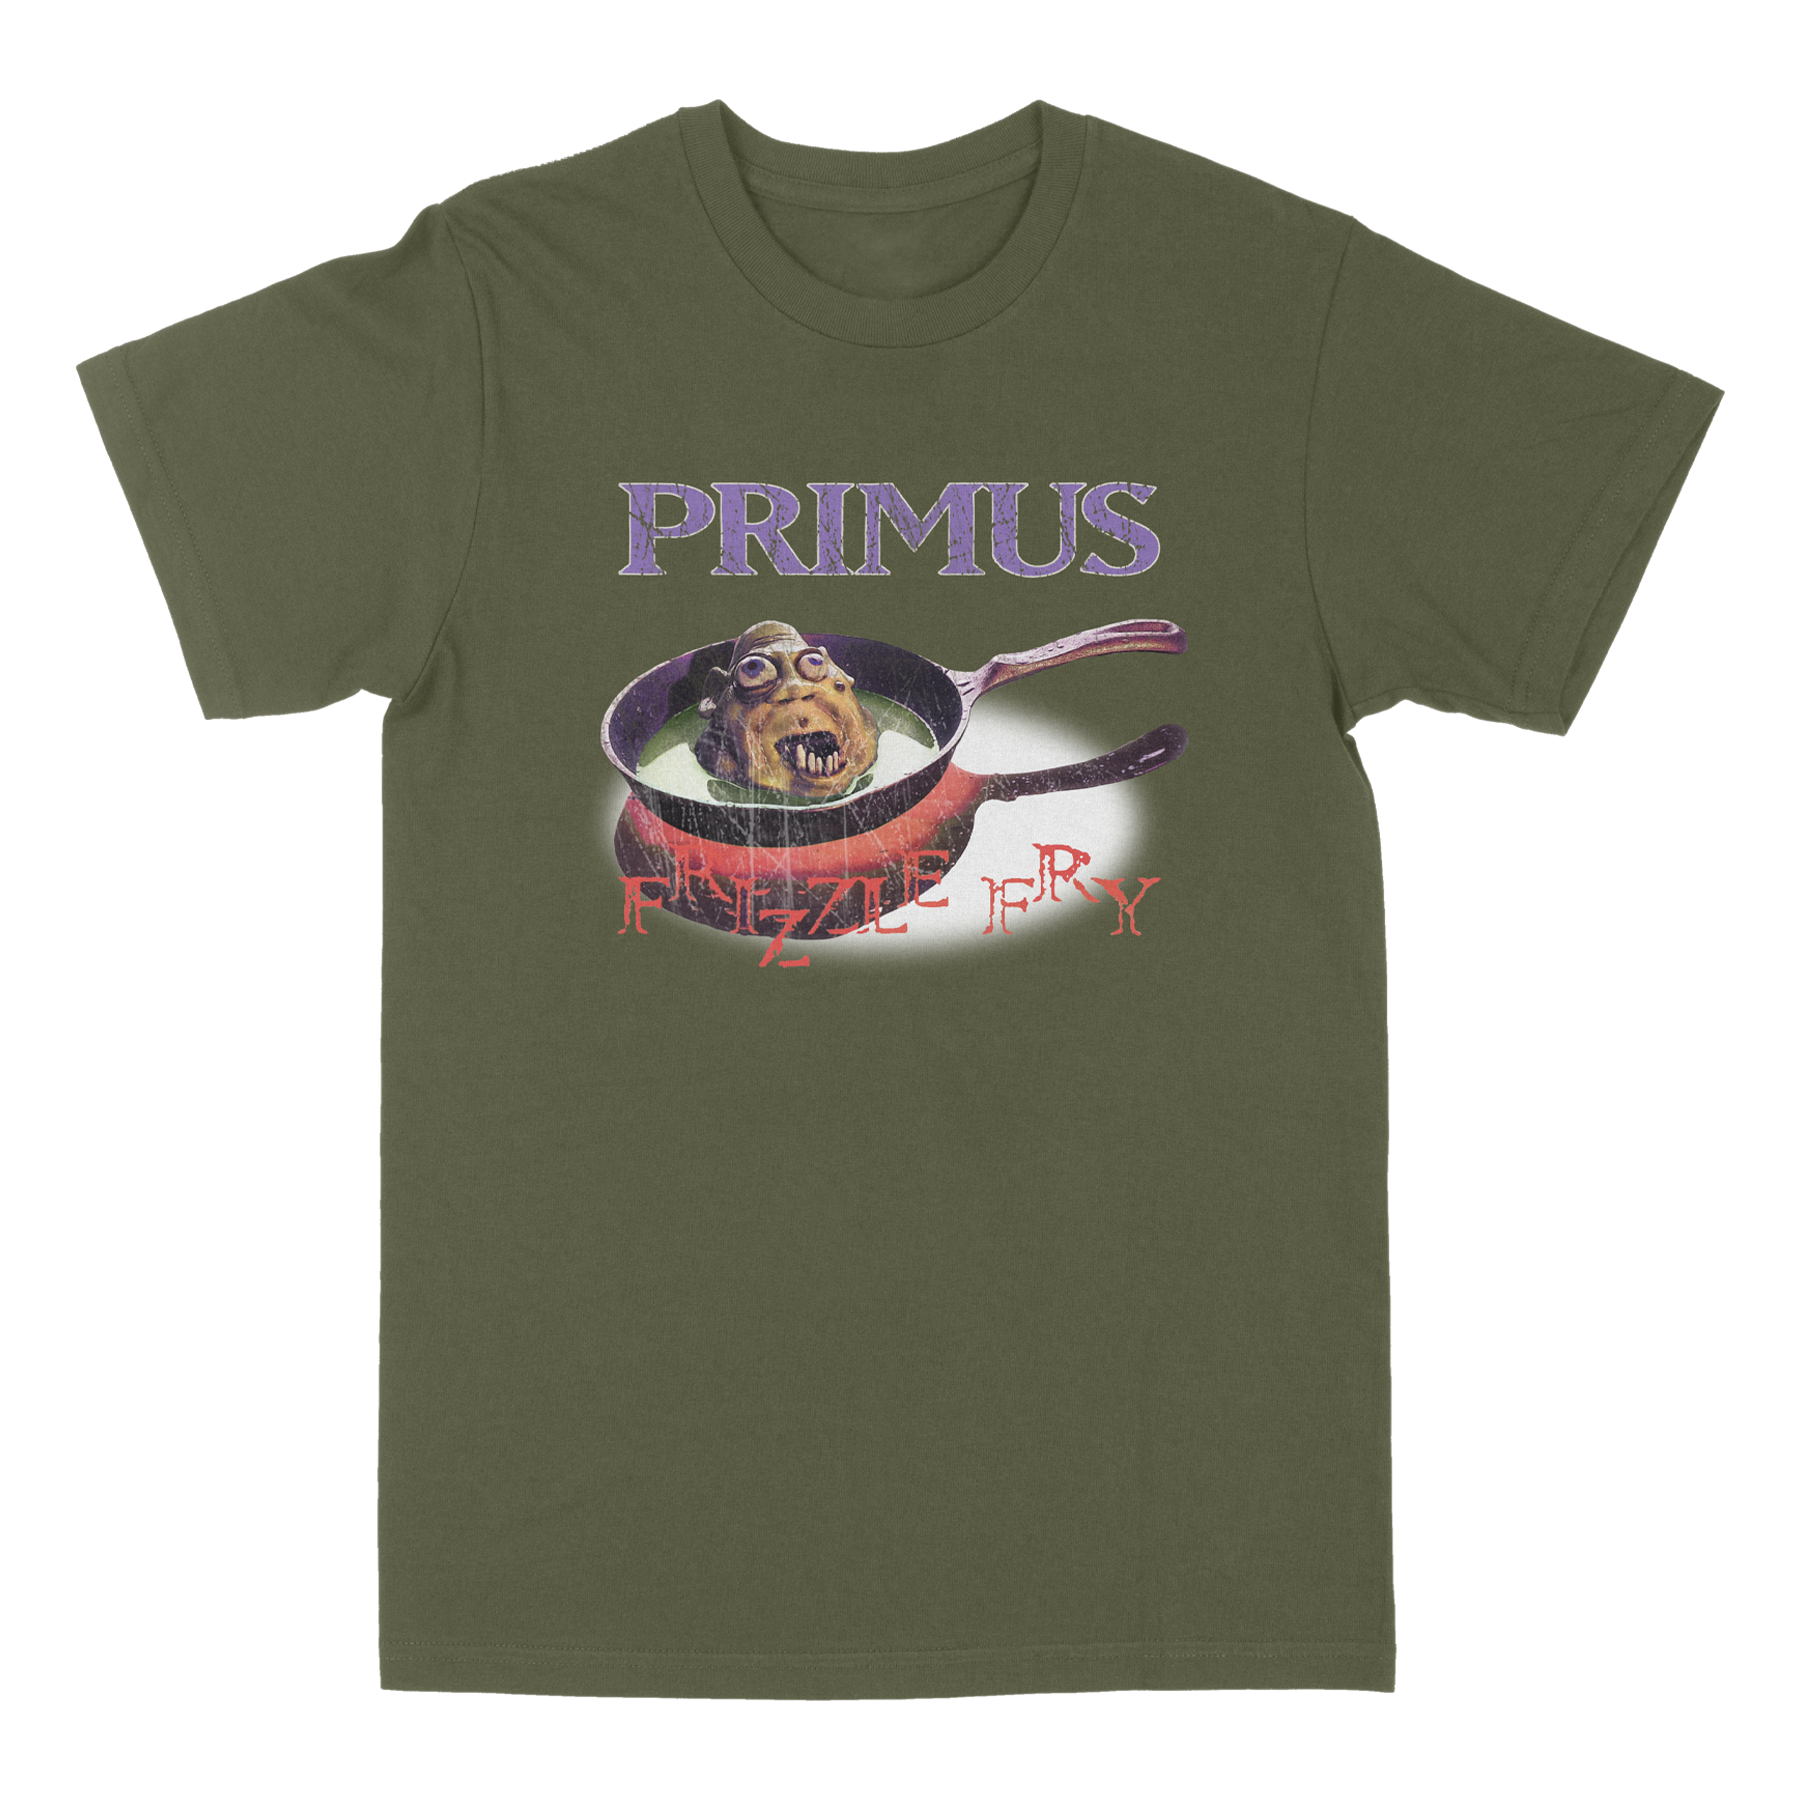 Primus - Frizzle Fry Tee